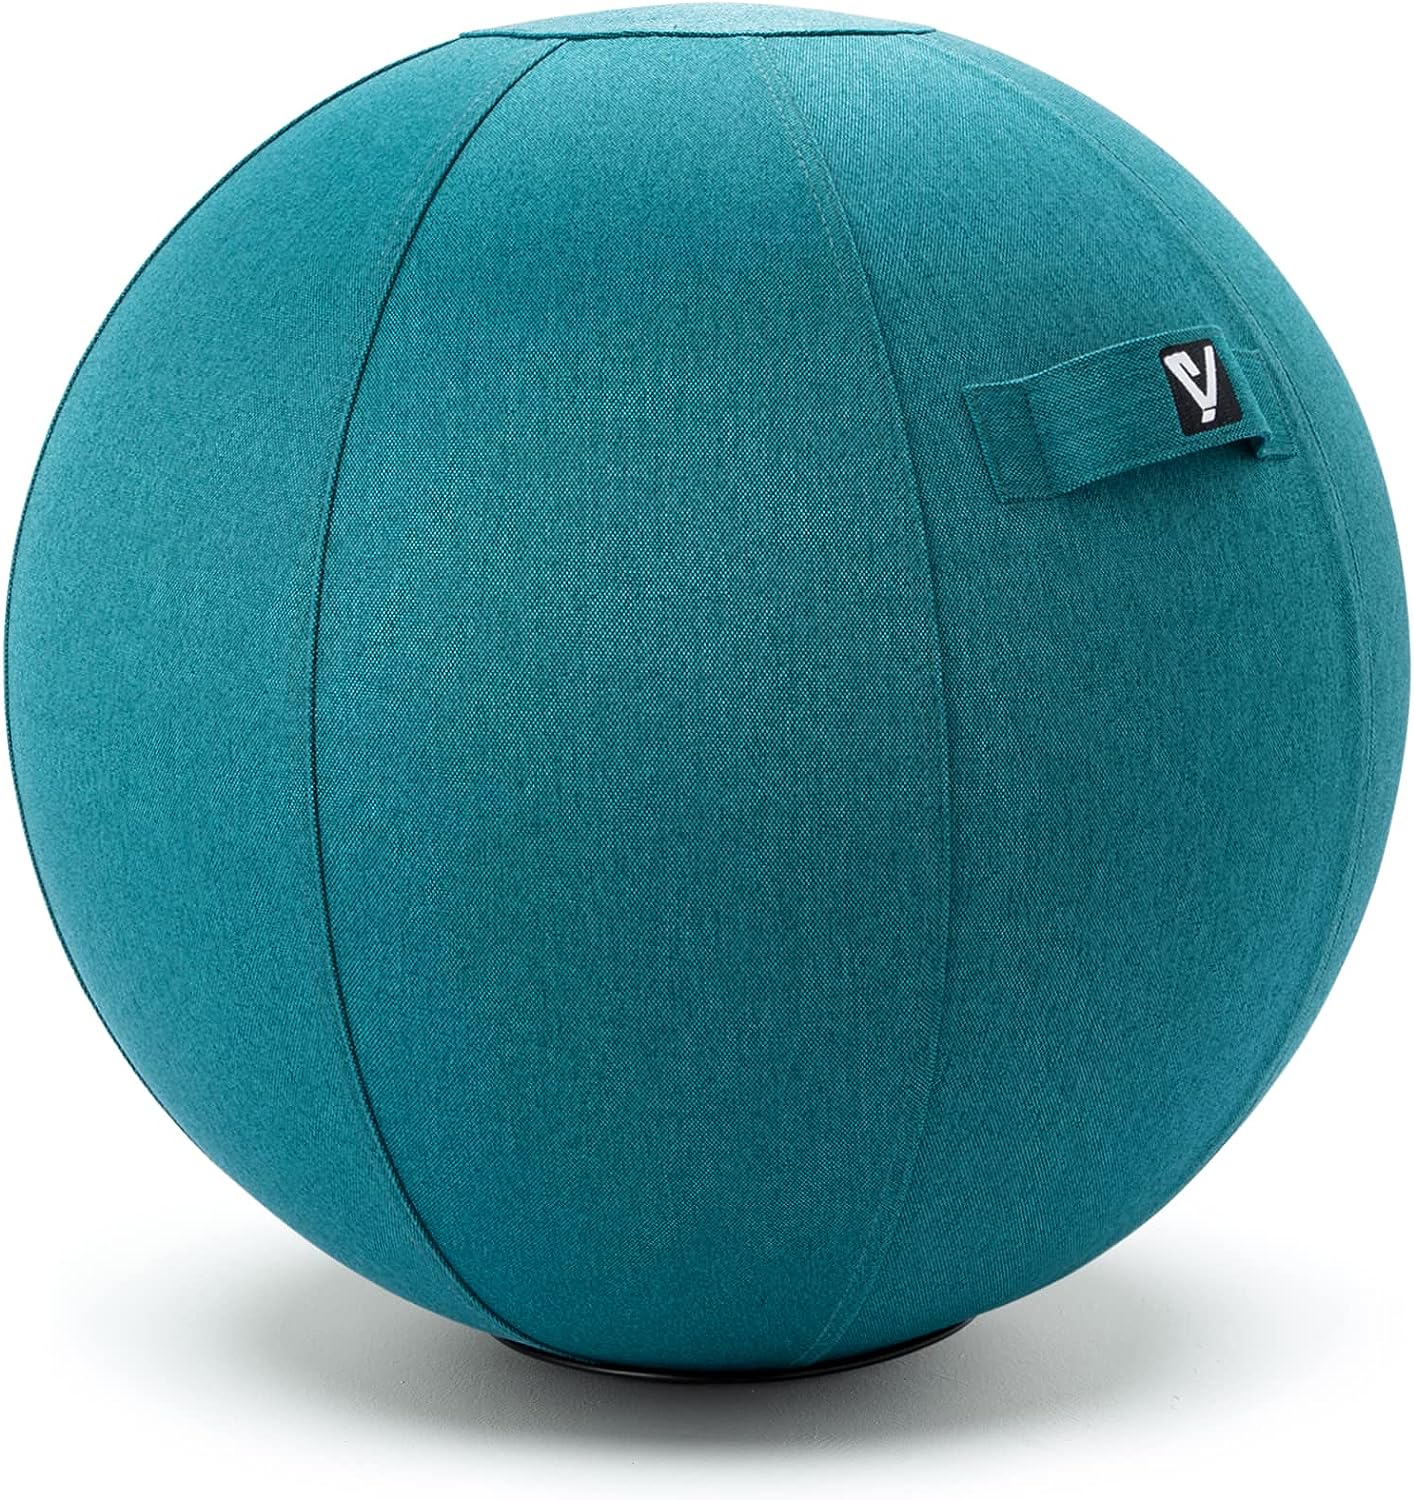 YOGIVO Sitting Ball Chair for Office and Home, Pilates Exercise Yoga Ball with Cover for Balance, Stability and Fitness, Ergonomic Posture Exercise Ball Seat with Handle and Pump (Ocean Blue, 24 in)